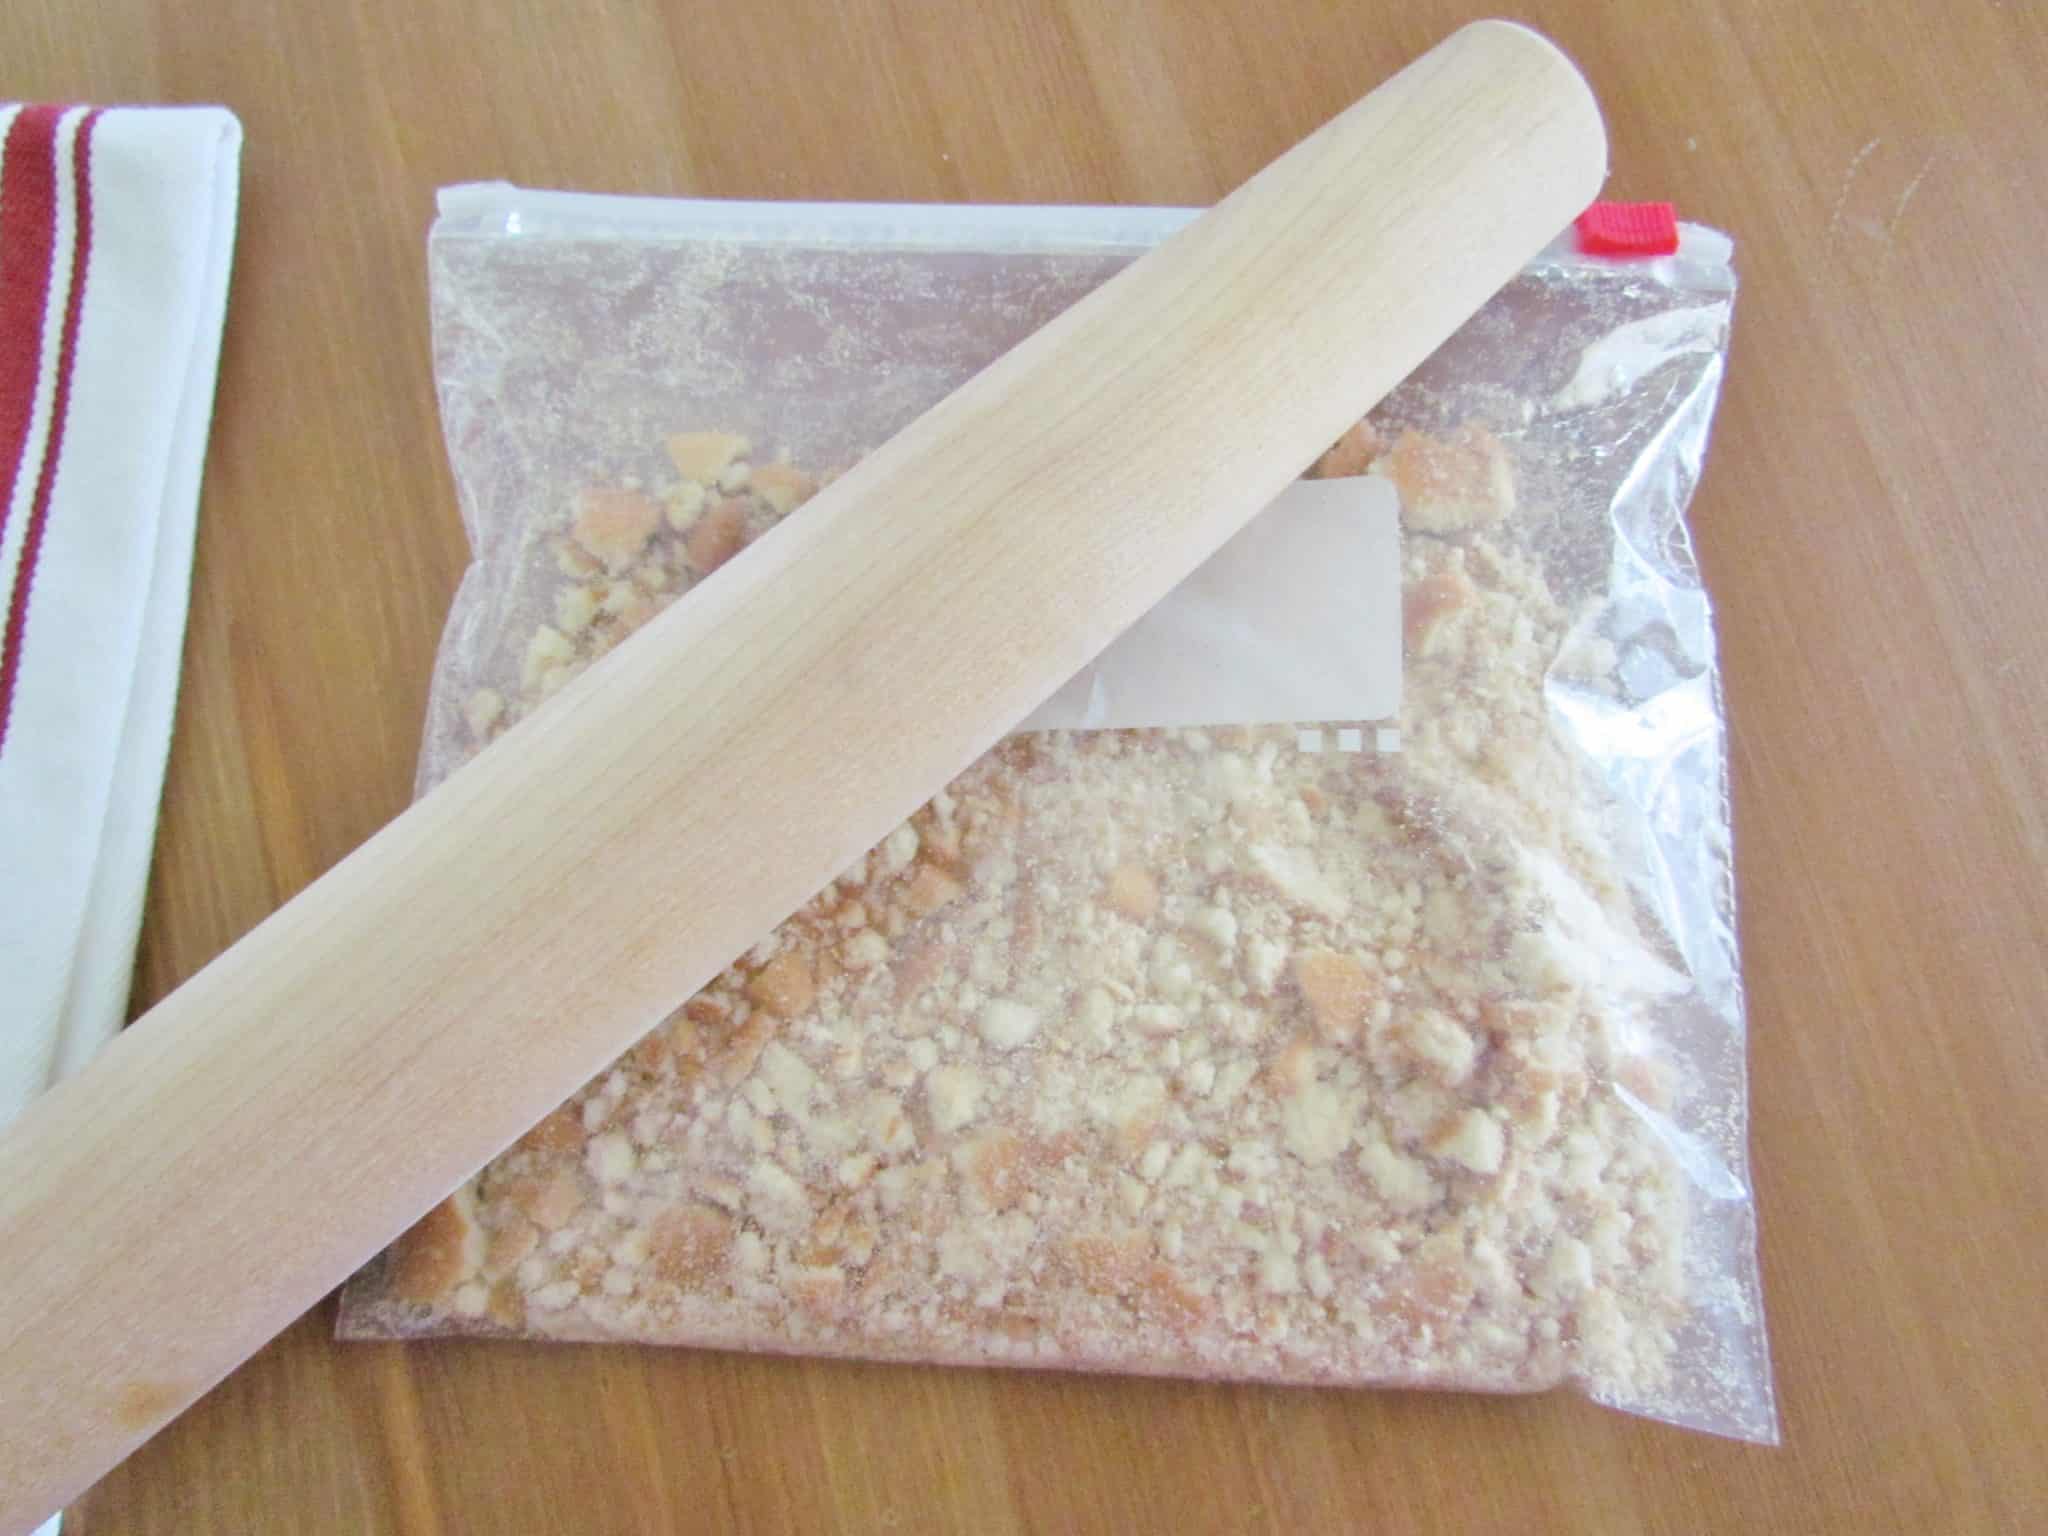 crushing vanilla (Nilla) wafers in a Ziploc bag with a wooden rolling pin.